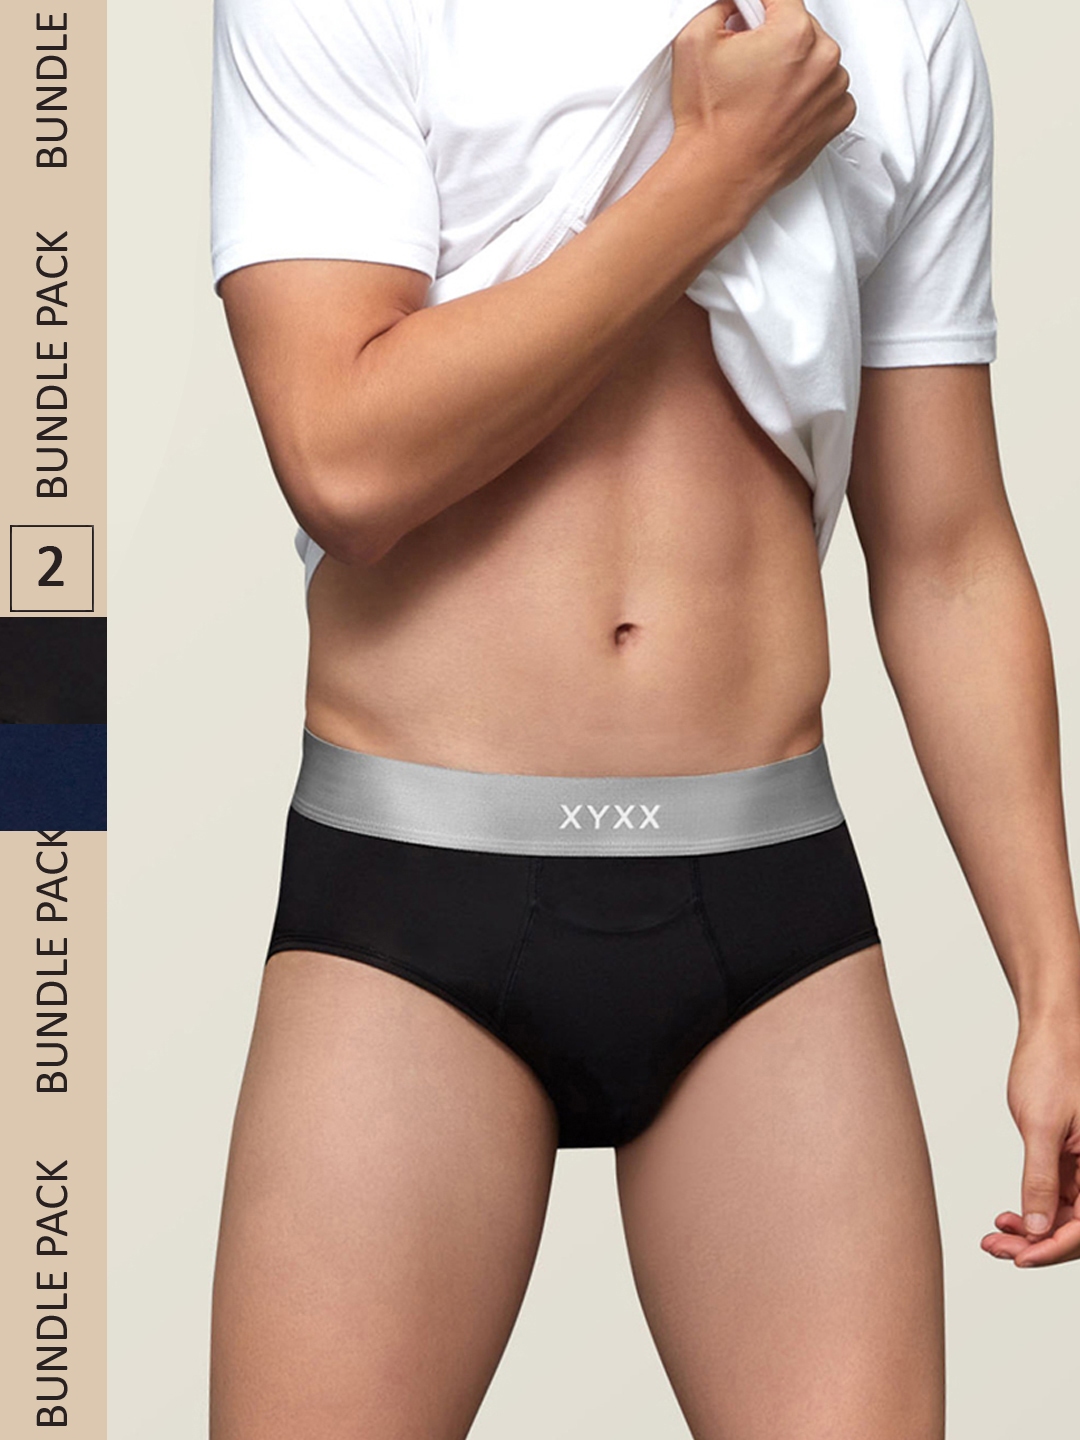  Antimicrobial Underwear For Men